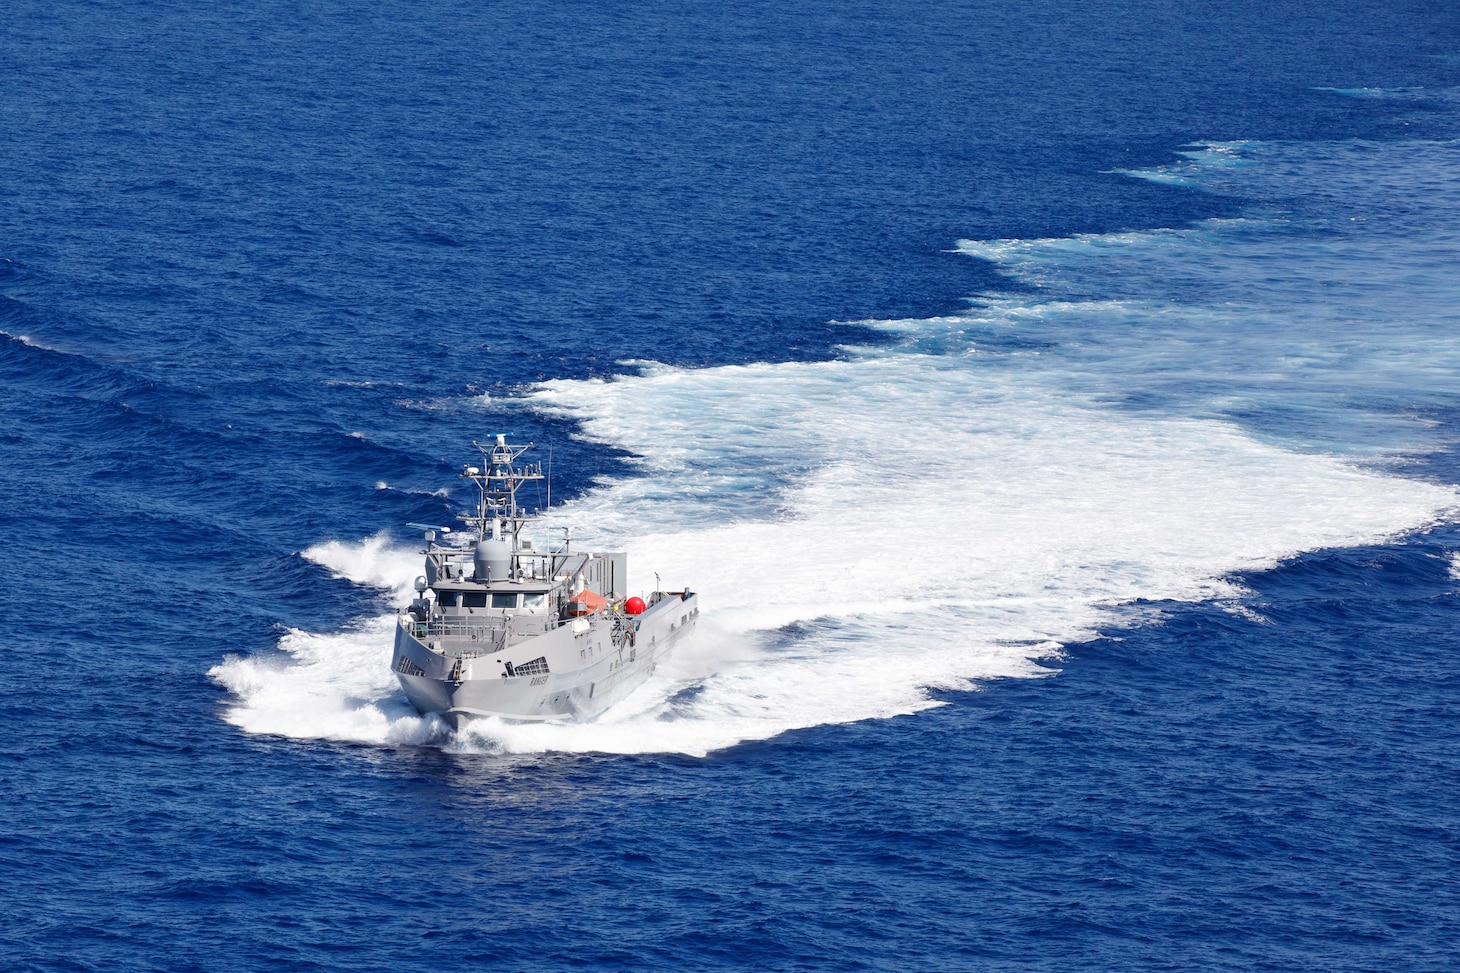 The unmanned surface vessel Ranger transits the Pacific Ocean during Integrated Battle Problem (IBP) 23.2, Sep. 7, 2023. IBP 23.2 is a Pacific Fleet exercise to test, develop and evaluate the integration of unmanned platforms into fleet operations to create warfighting advantages. (U.S. Navy photo by Mass Communication Specialist 2nd Class Jesse Monford)